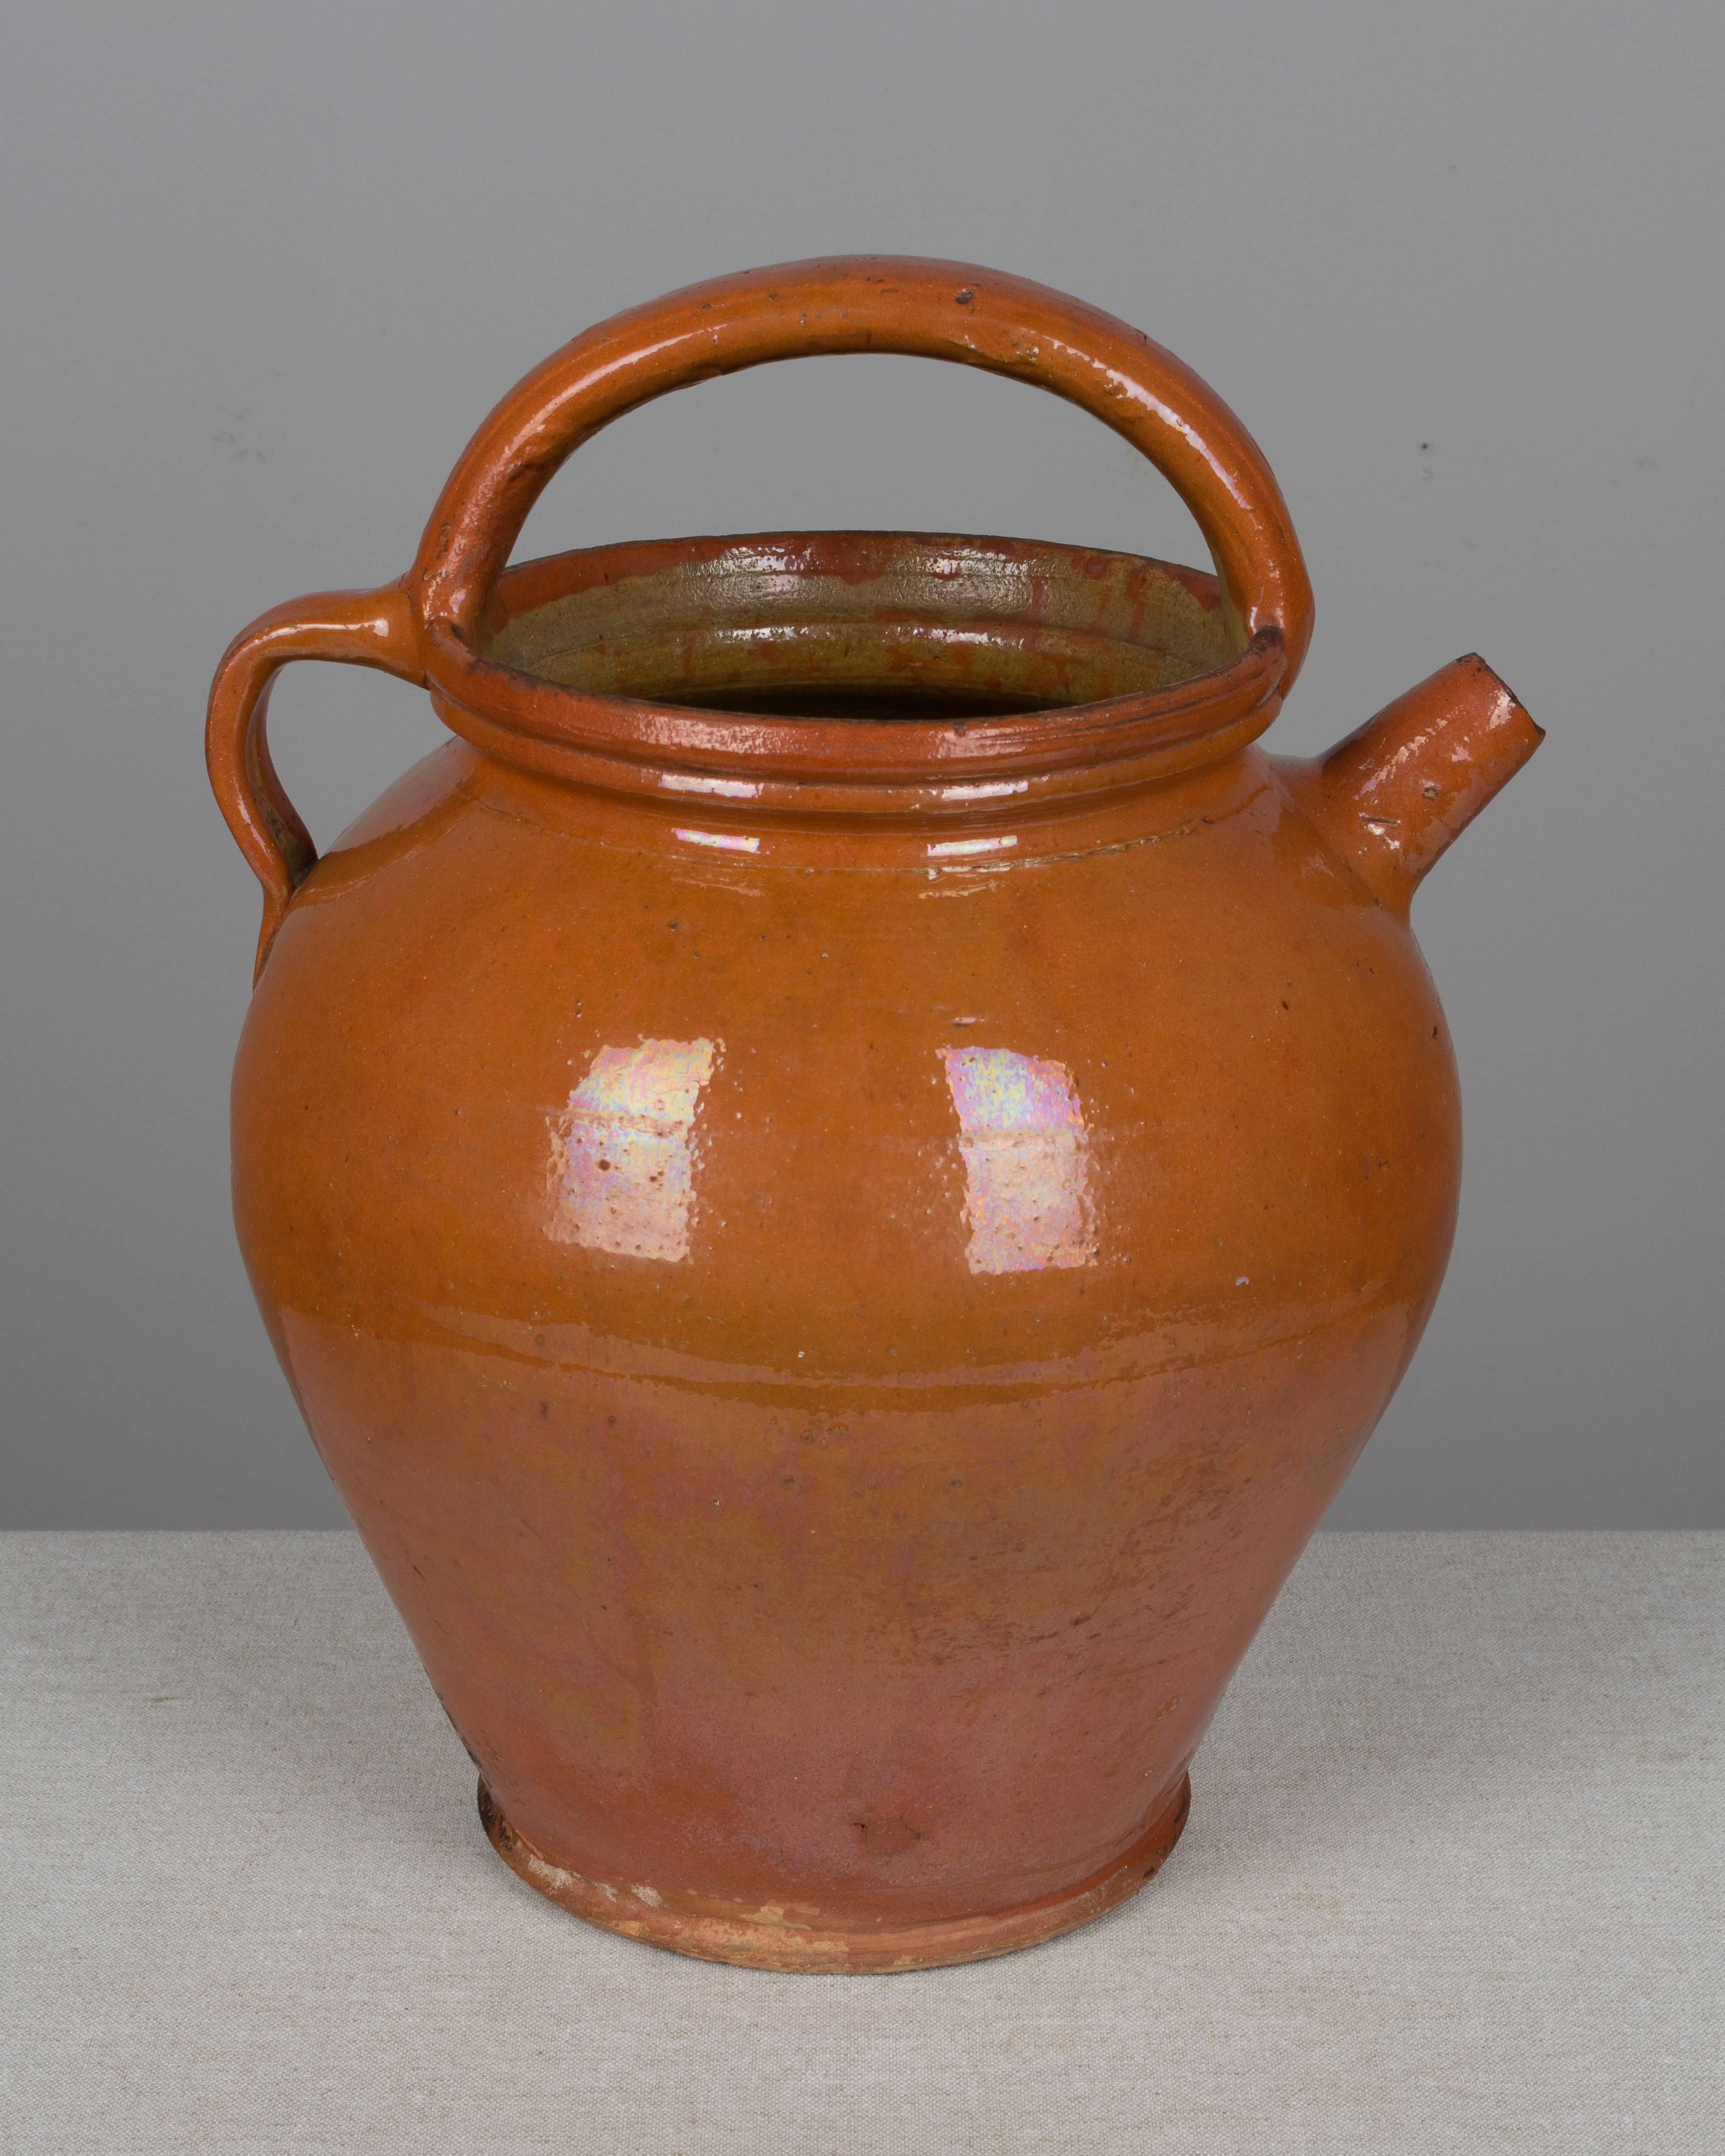 A large French glazed terracotta jug from the Southwest of France. Measure: 15